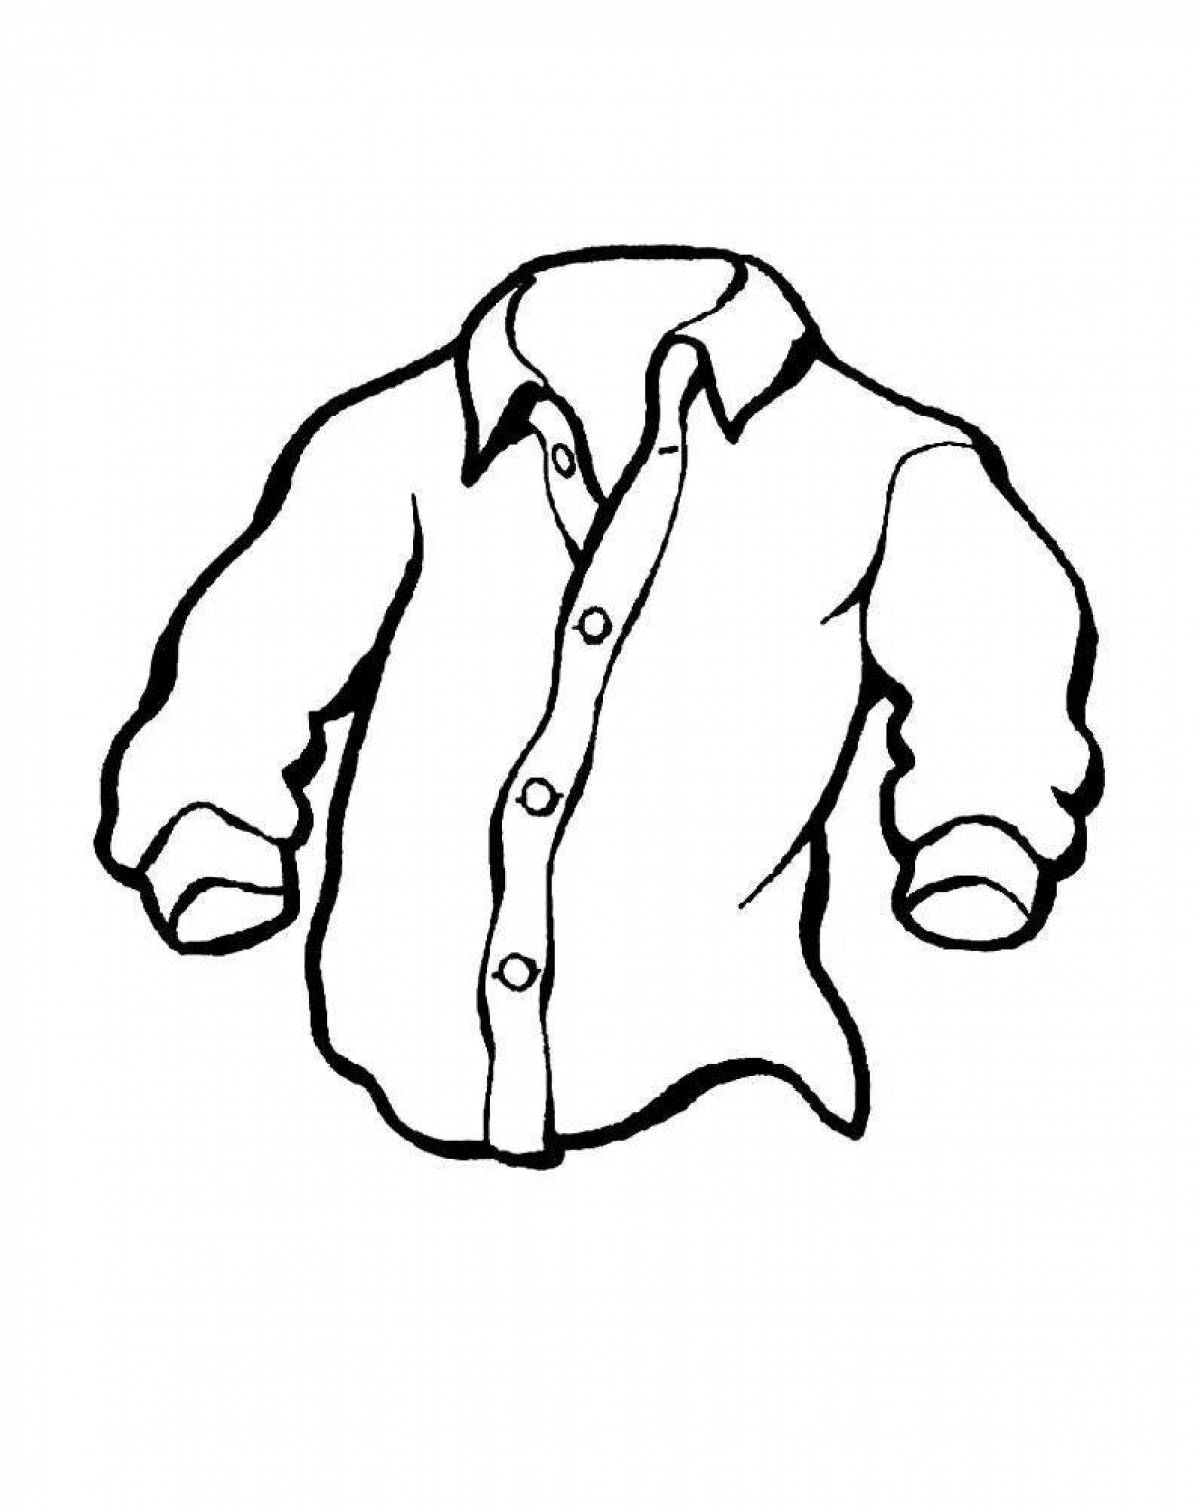 Coloring shirt for children 4-5 years old